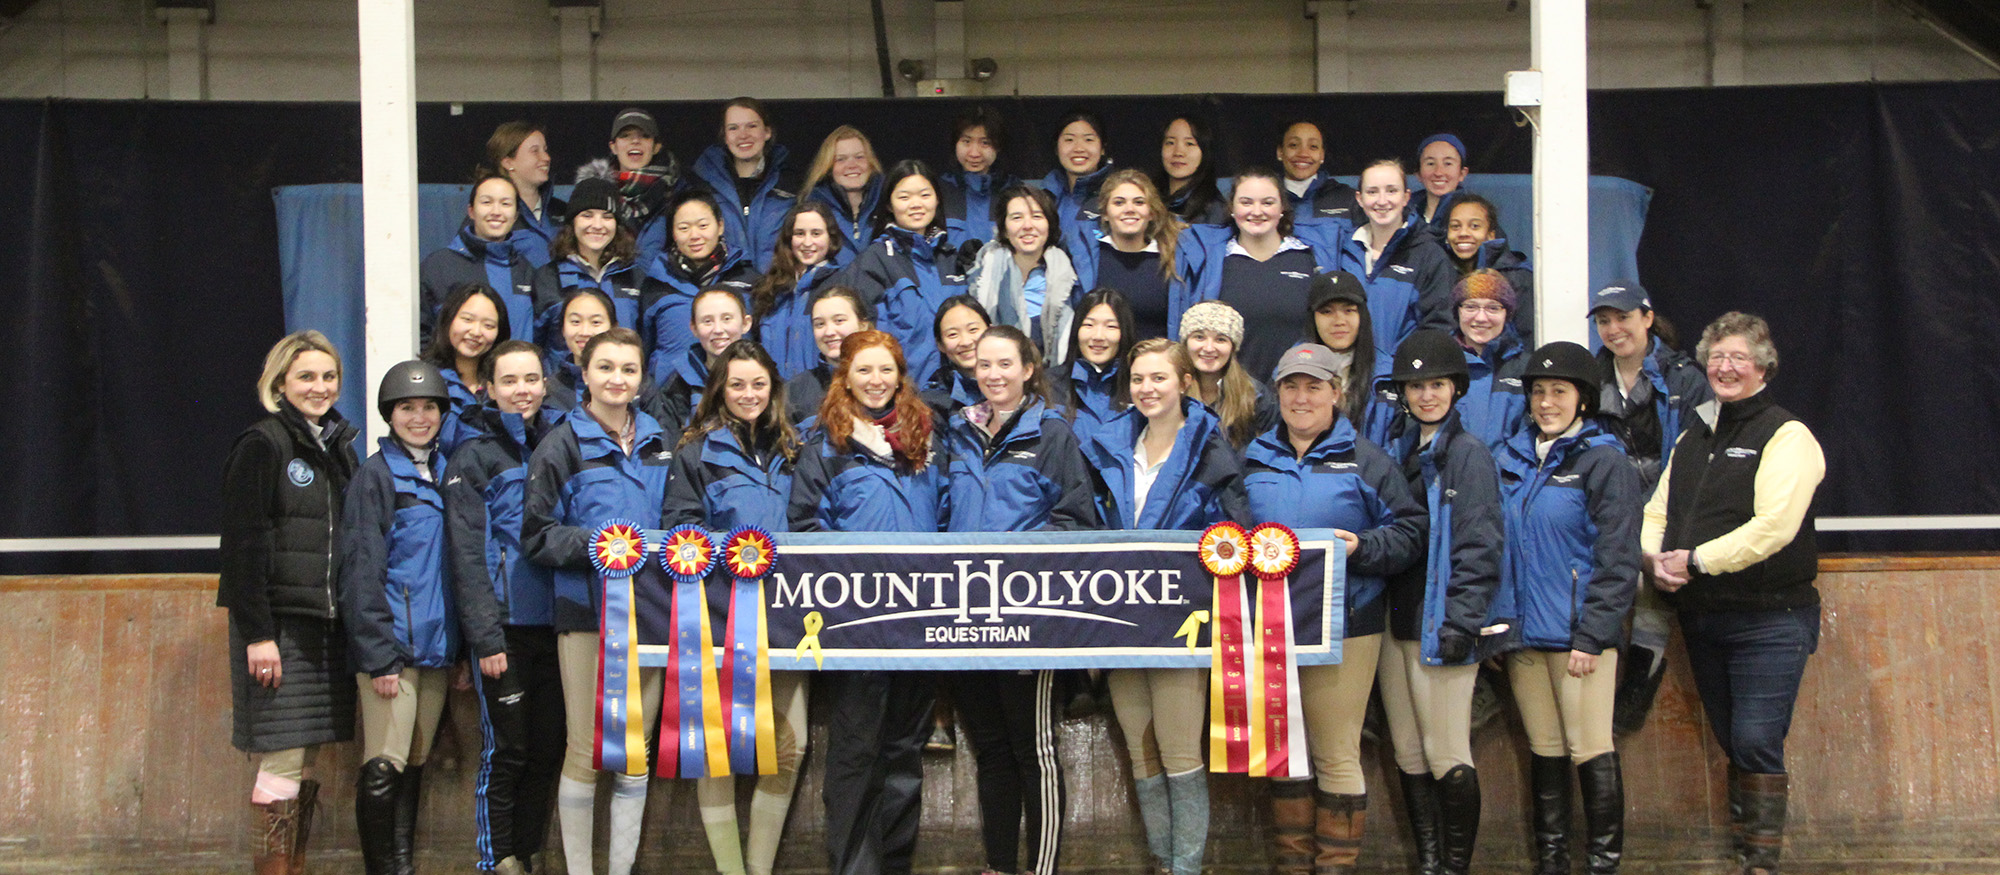 Group photo of the Lyons Equestrian Team following their victory at home on March 3, 2018.